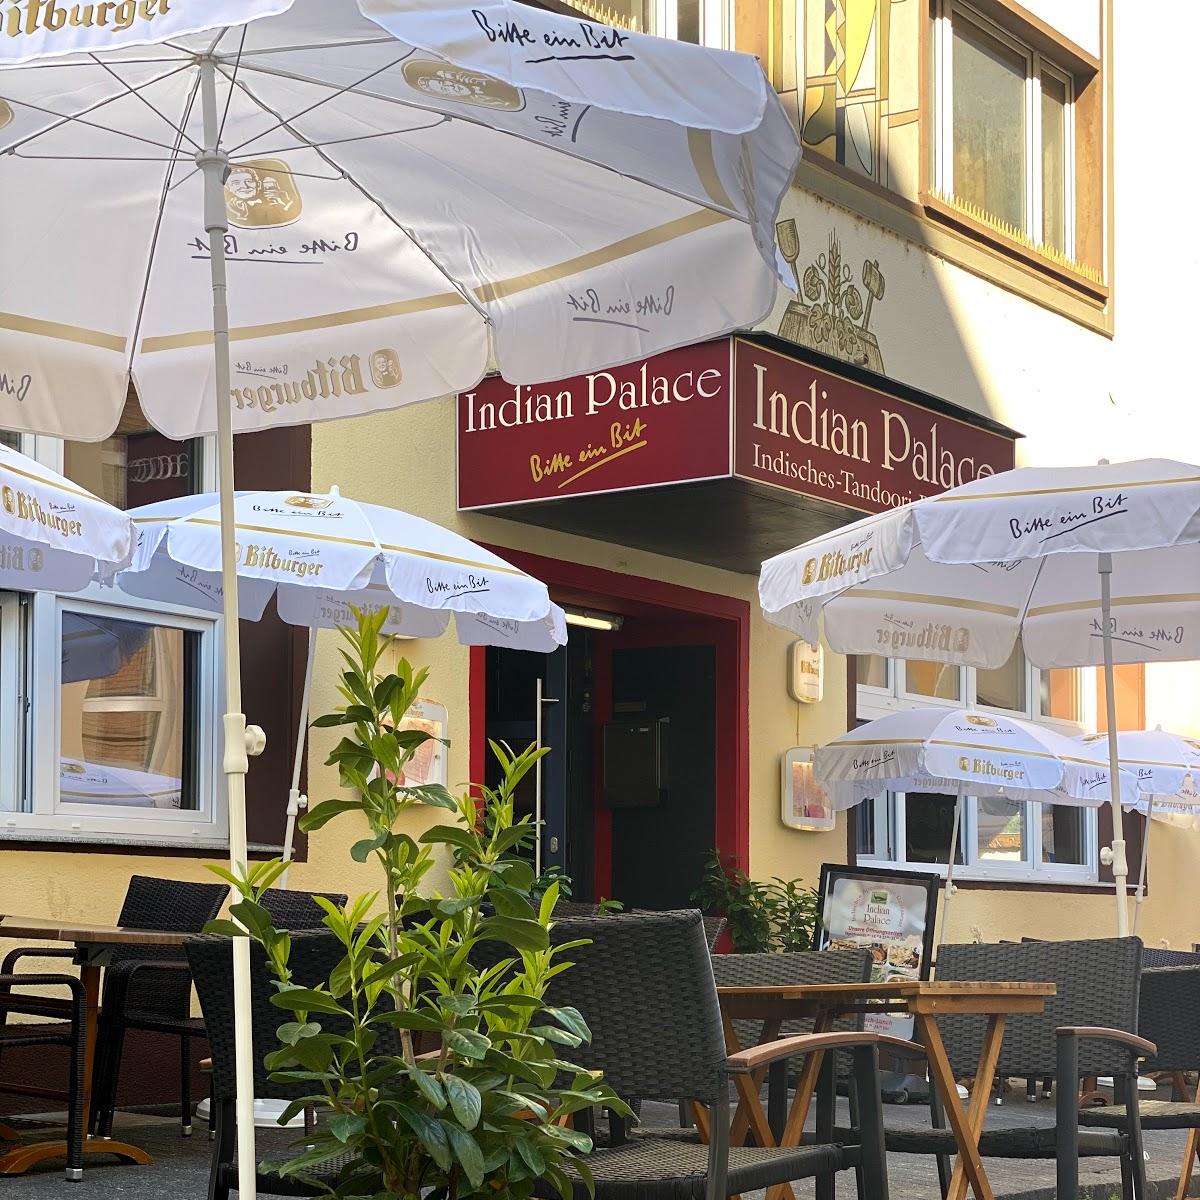 Restaurant "Indian Palace" in Mainz